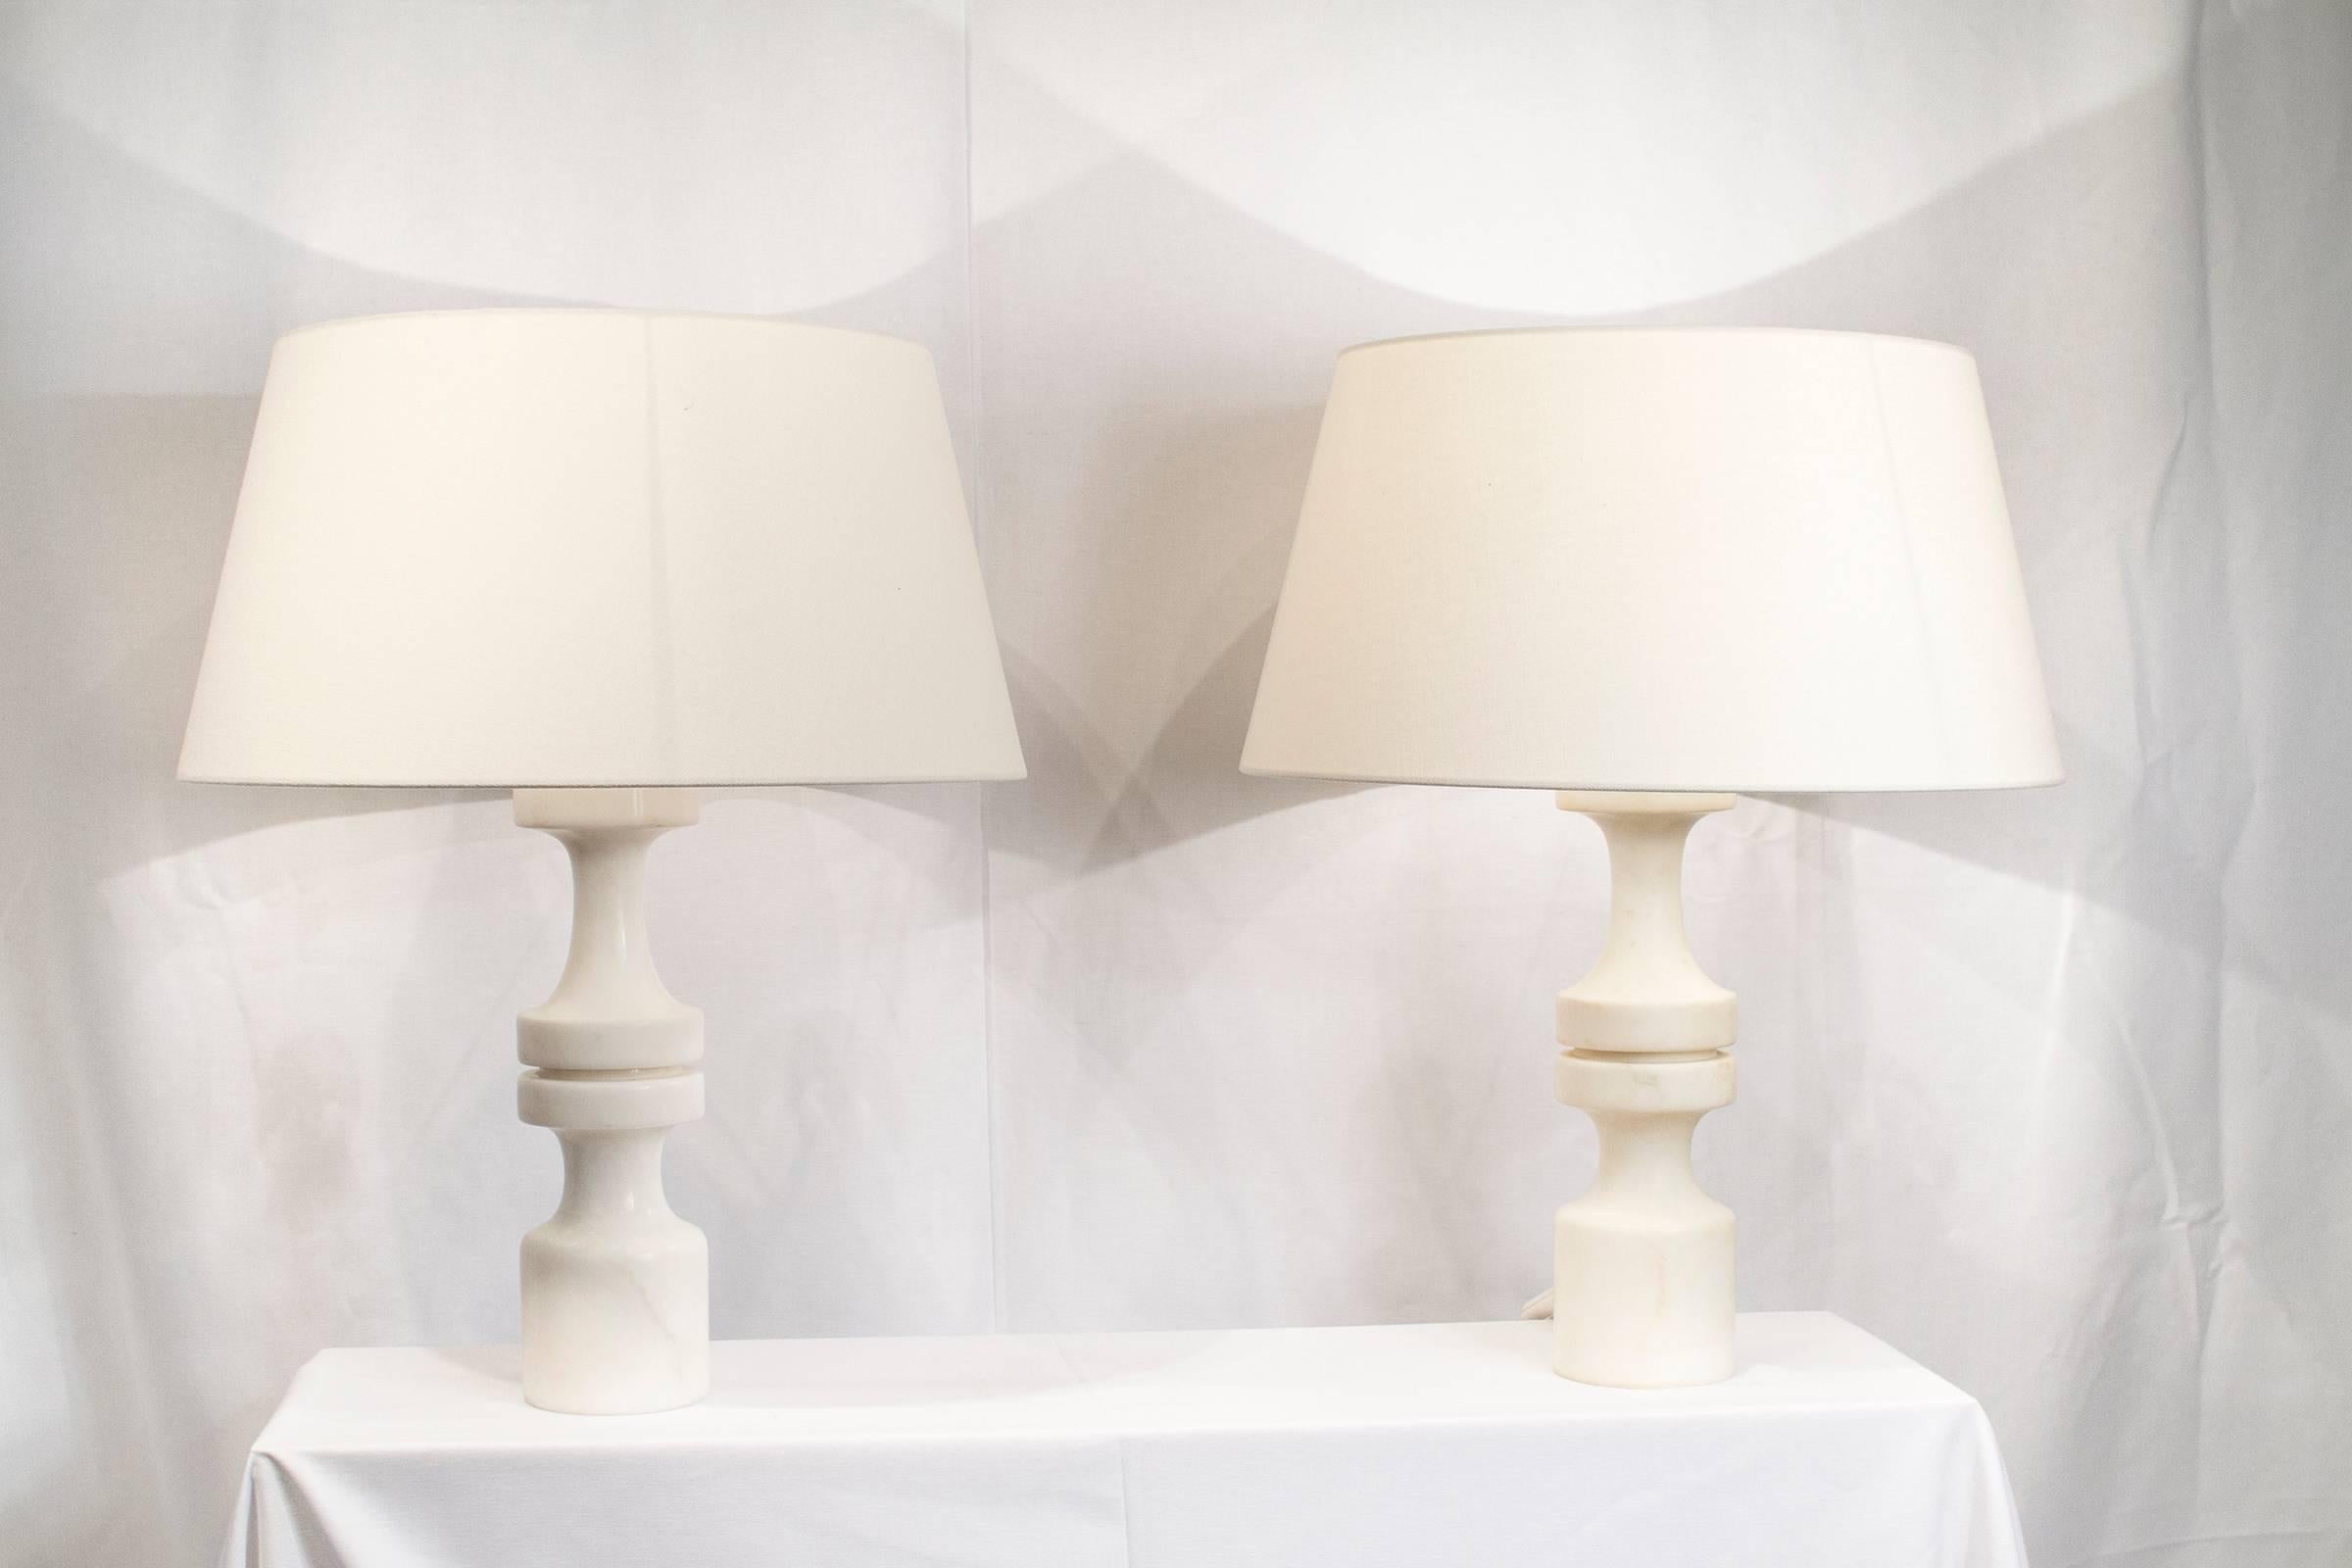 Very good looking pair of Mid-Century Italian alabaster lamps. One of the two lamps has a slightly more yellow tone. Shades not included.

Please contact us for delivery details.